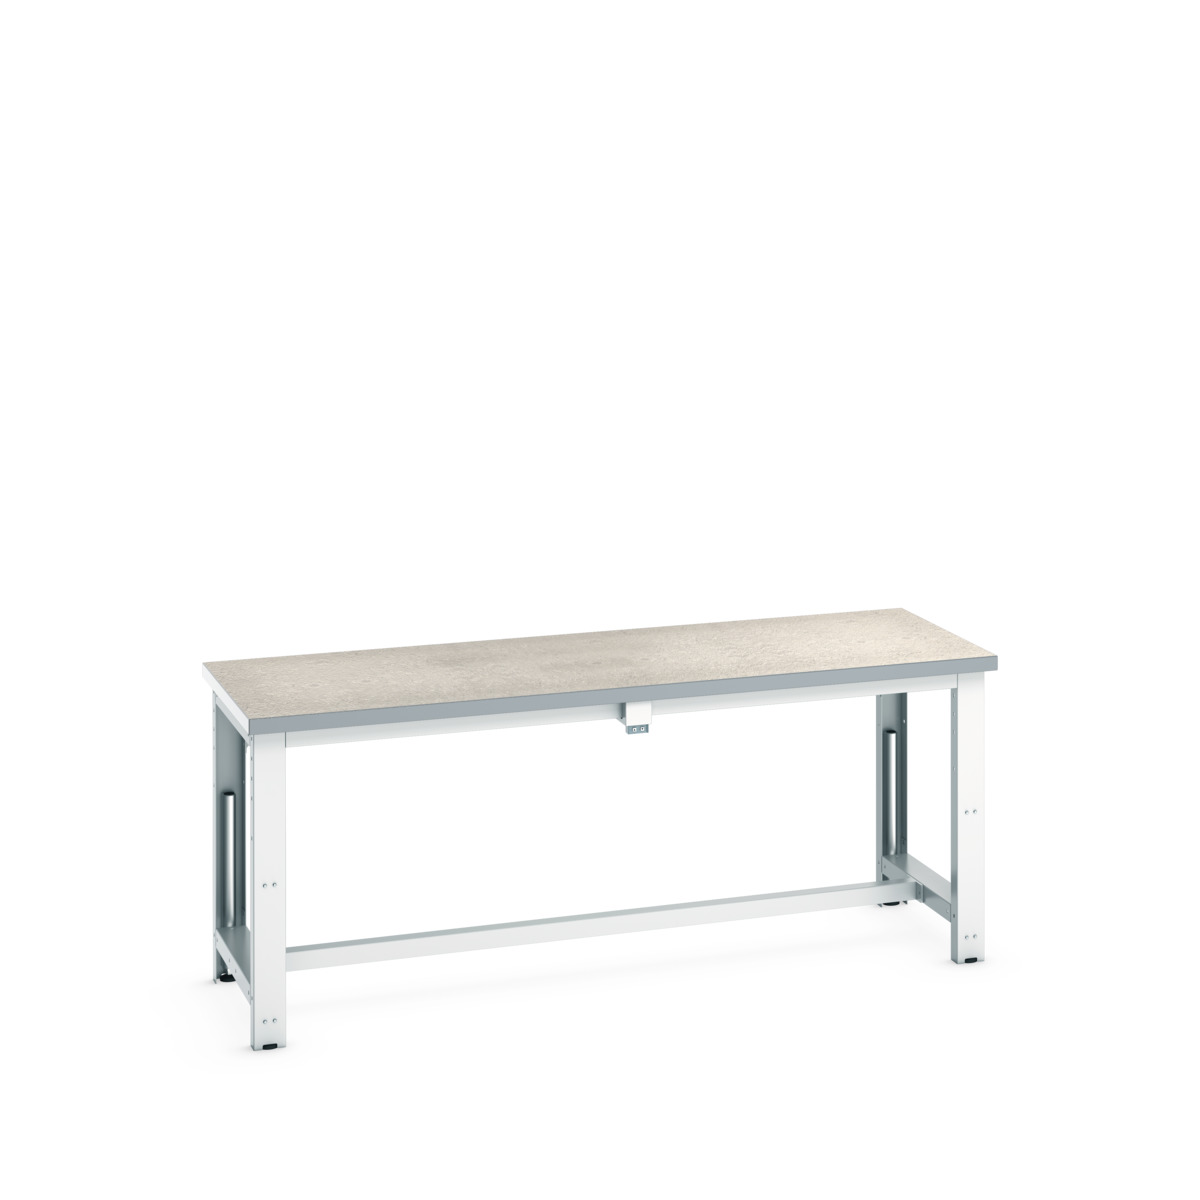 41003565. - cubio stepless adjustable height bench